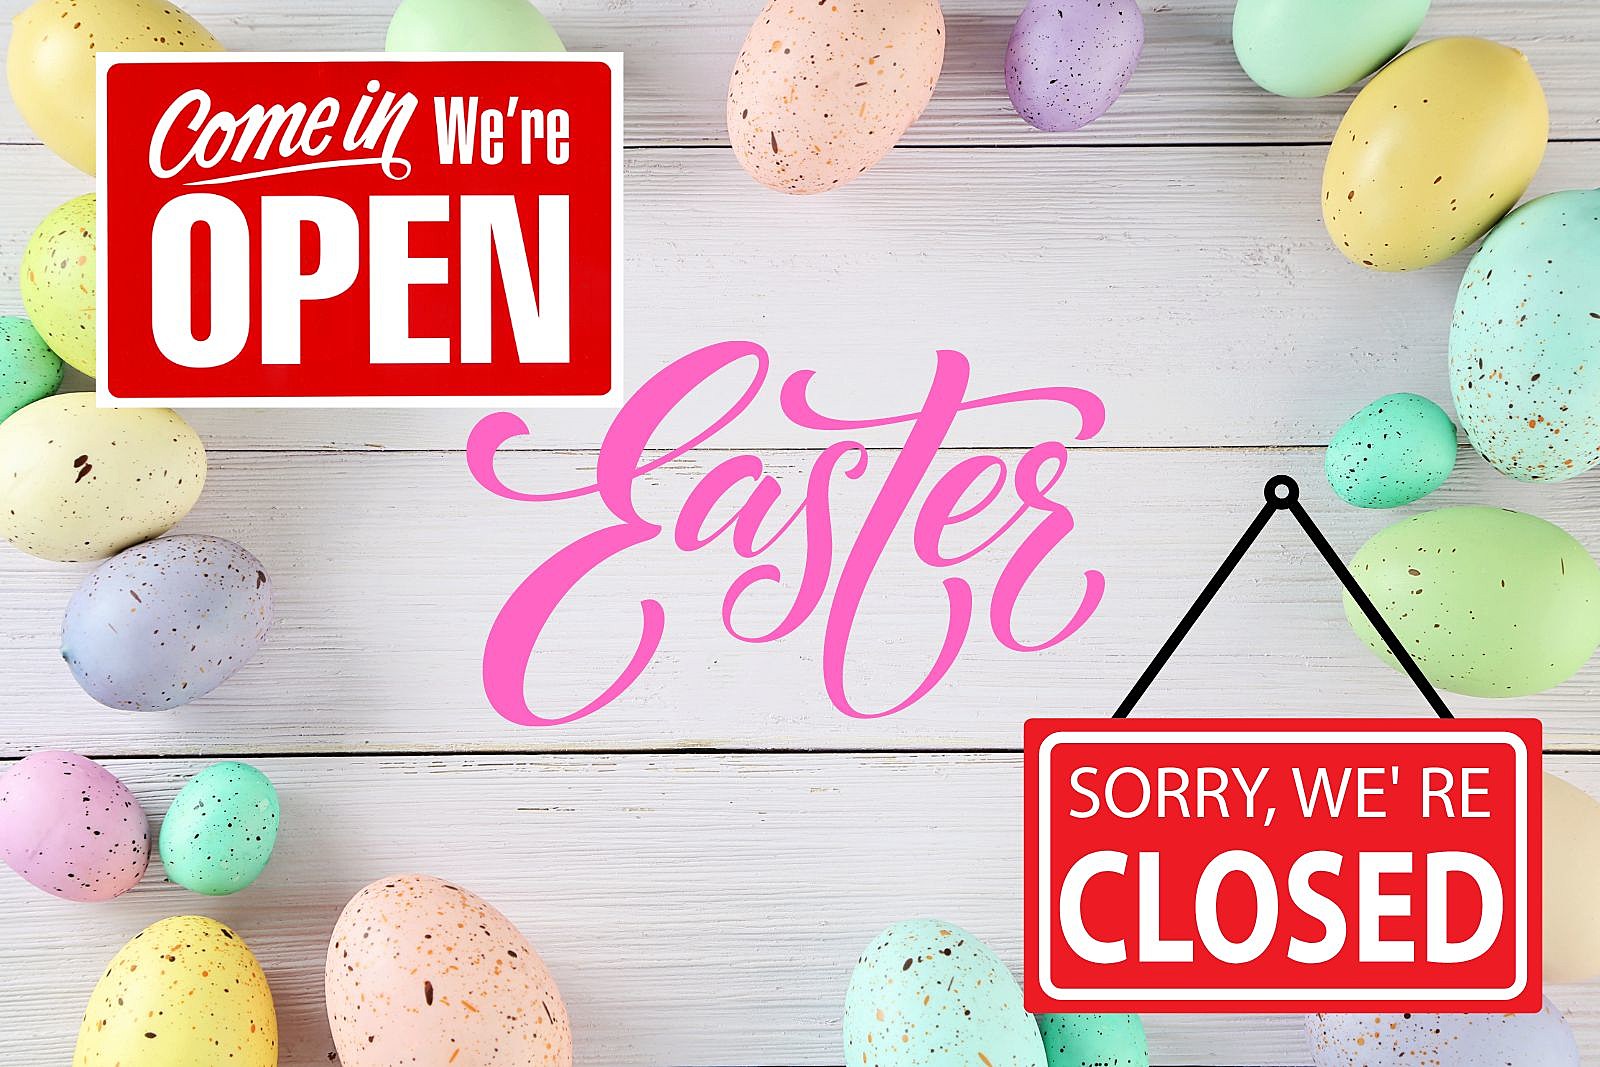 Here's What's Open and Closed On Easter in Amarillo